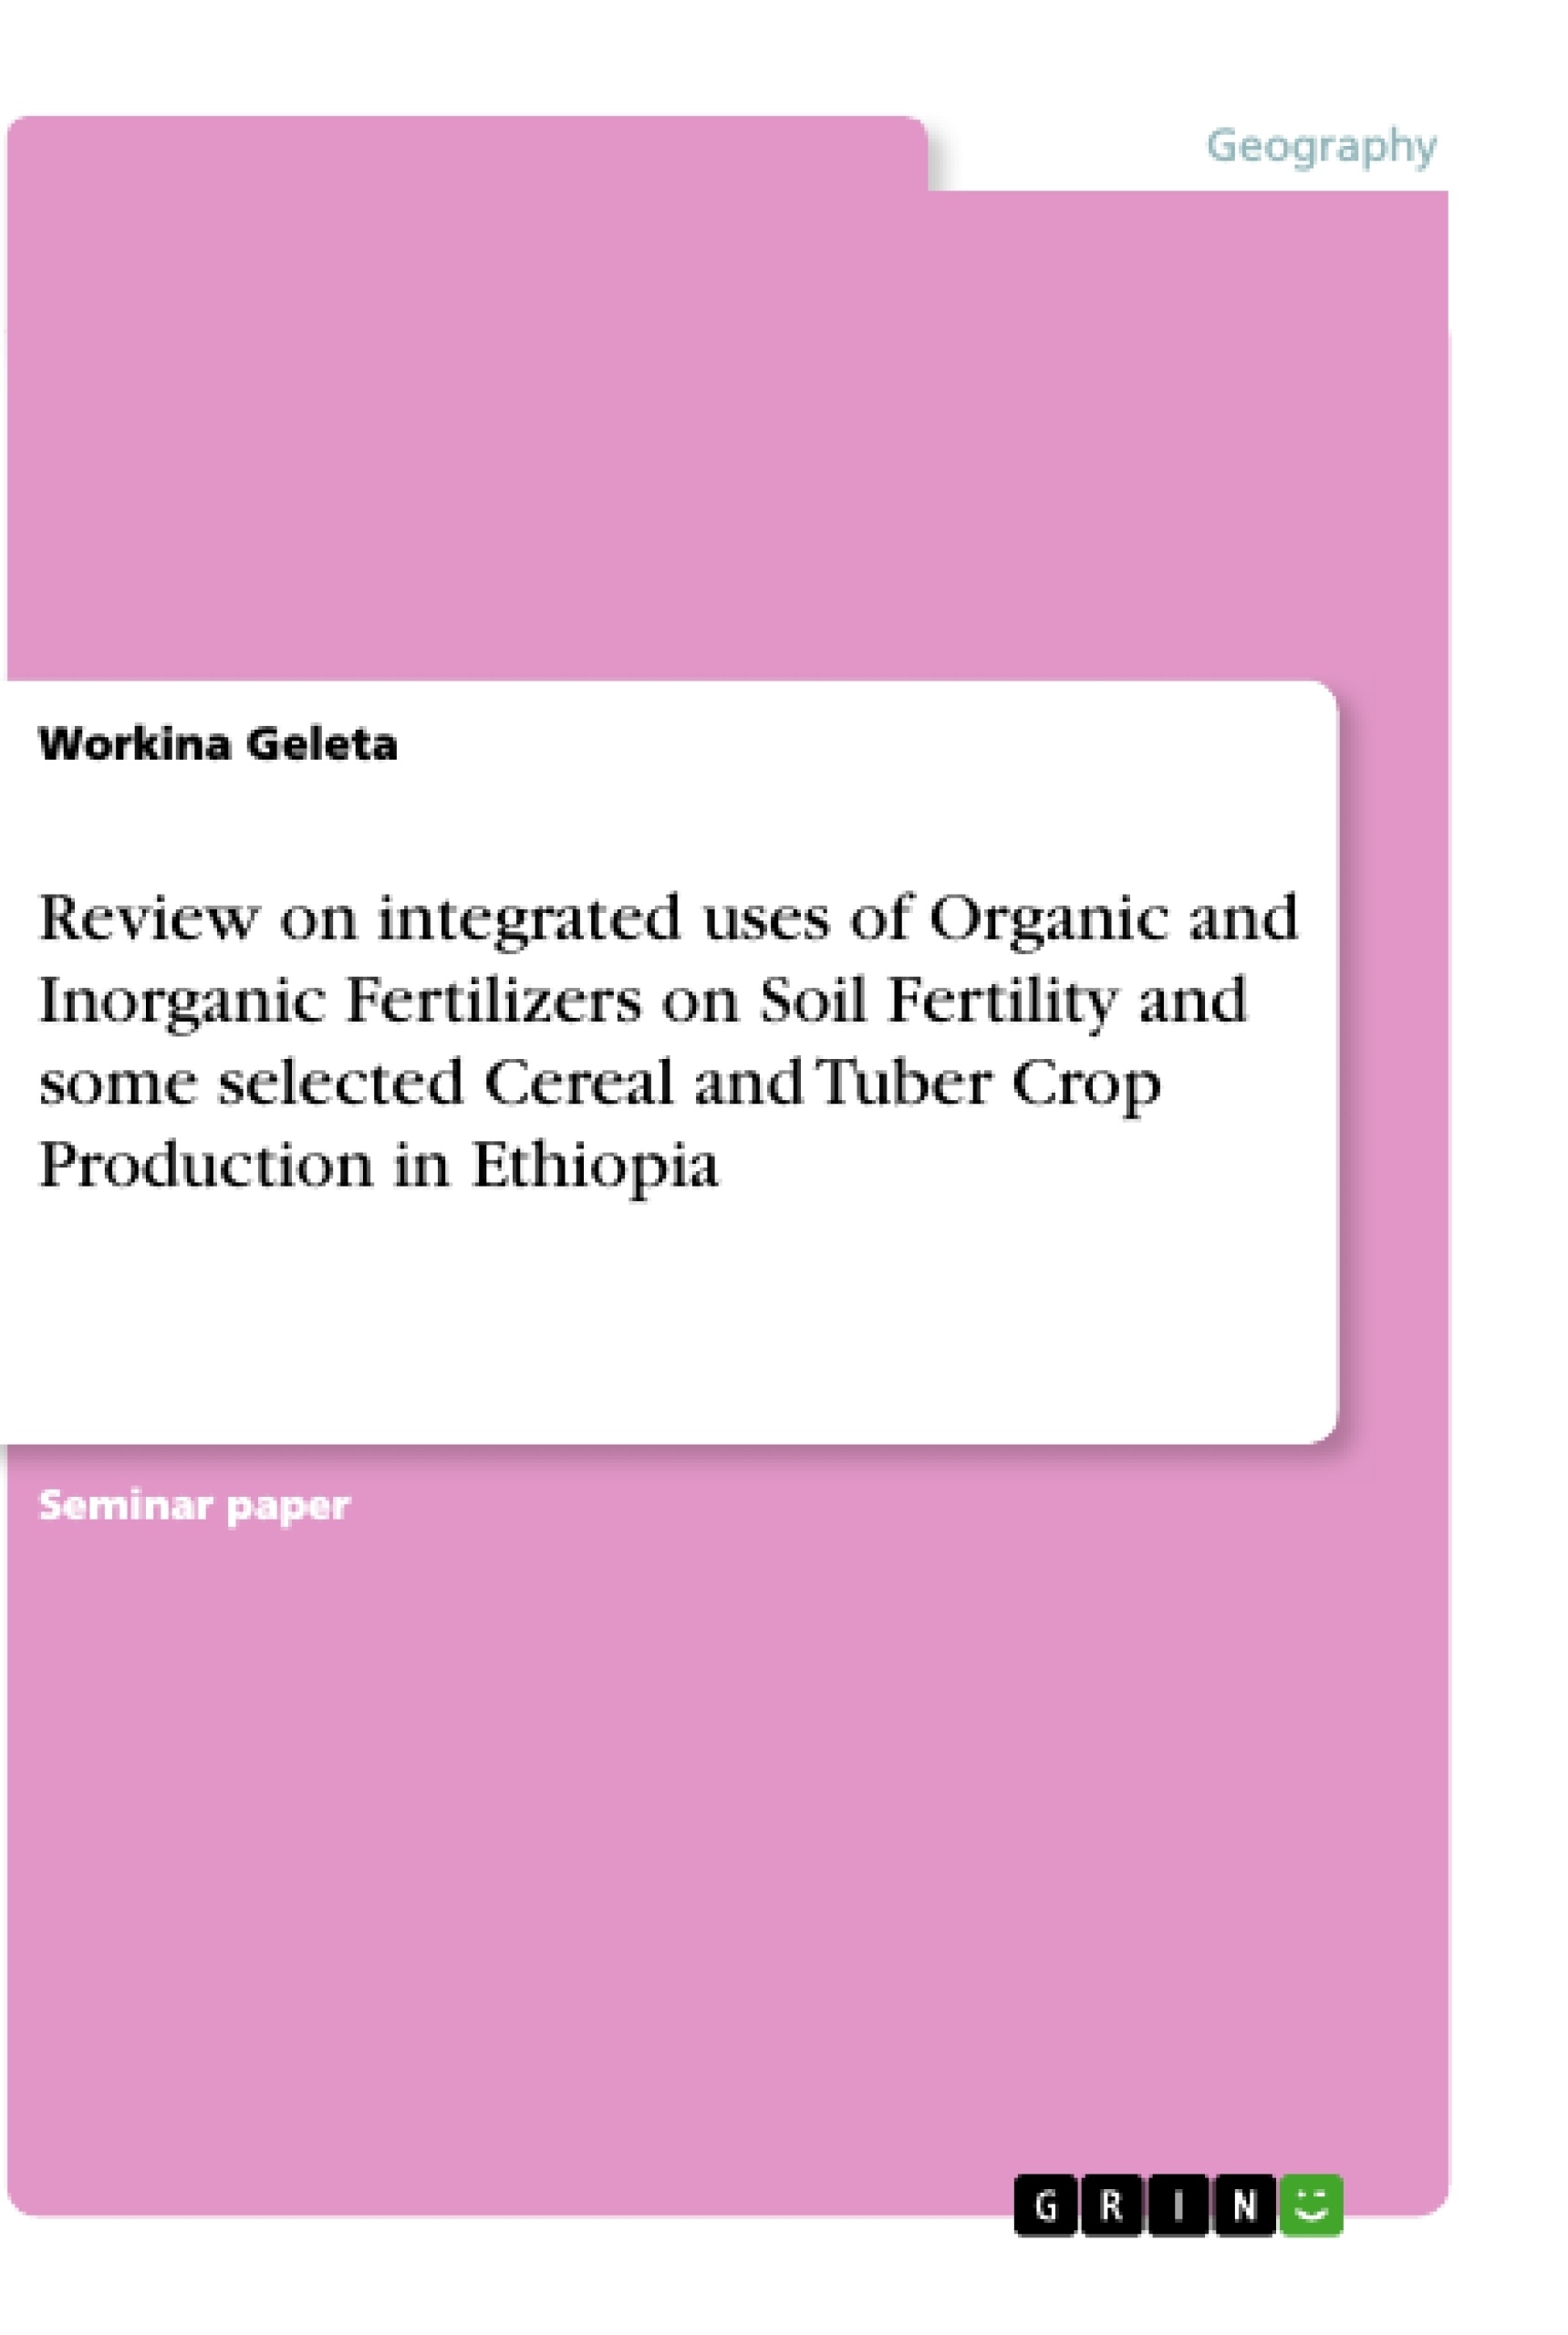 Título: Review on integrated uses of Organic and Inorganic Fertilizers on Soil Fertility and some selected Cereal and Tuber Crop Production in Ethiopia